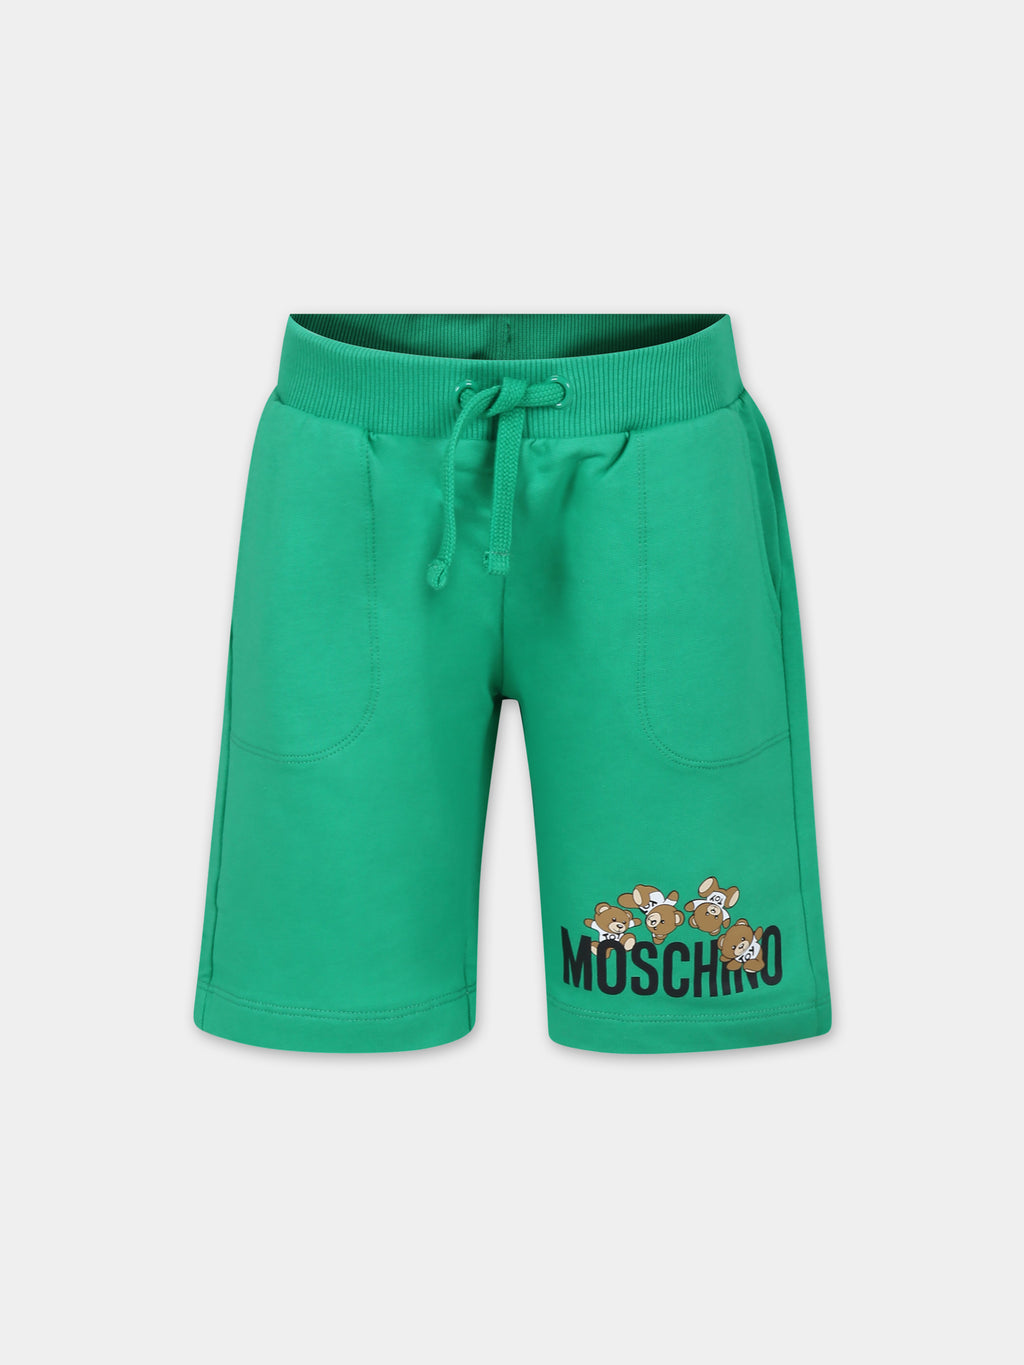 Green shorts for kids with Teddy Bears and logo